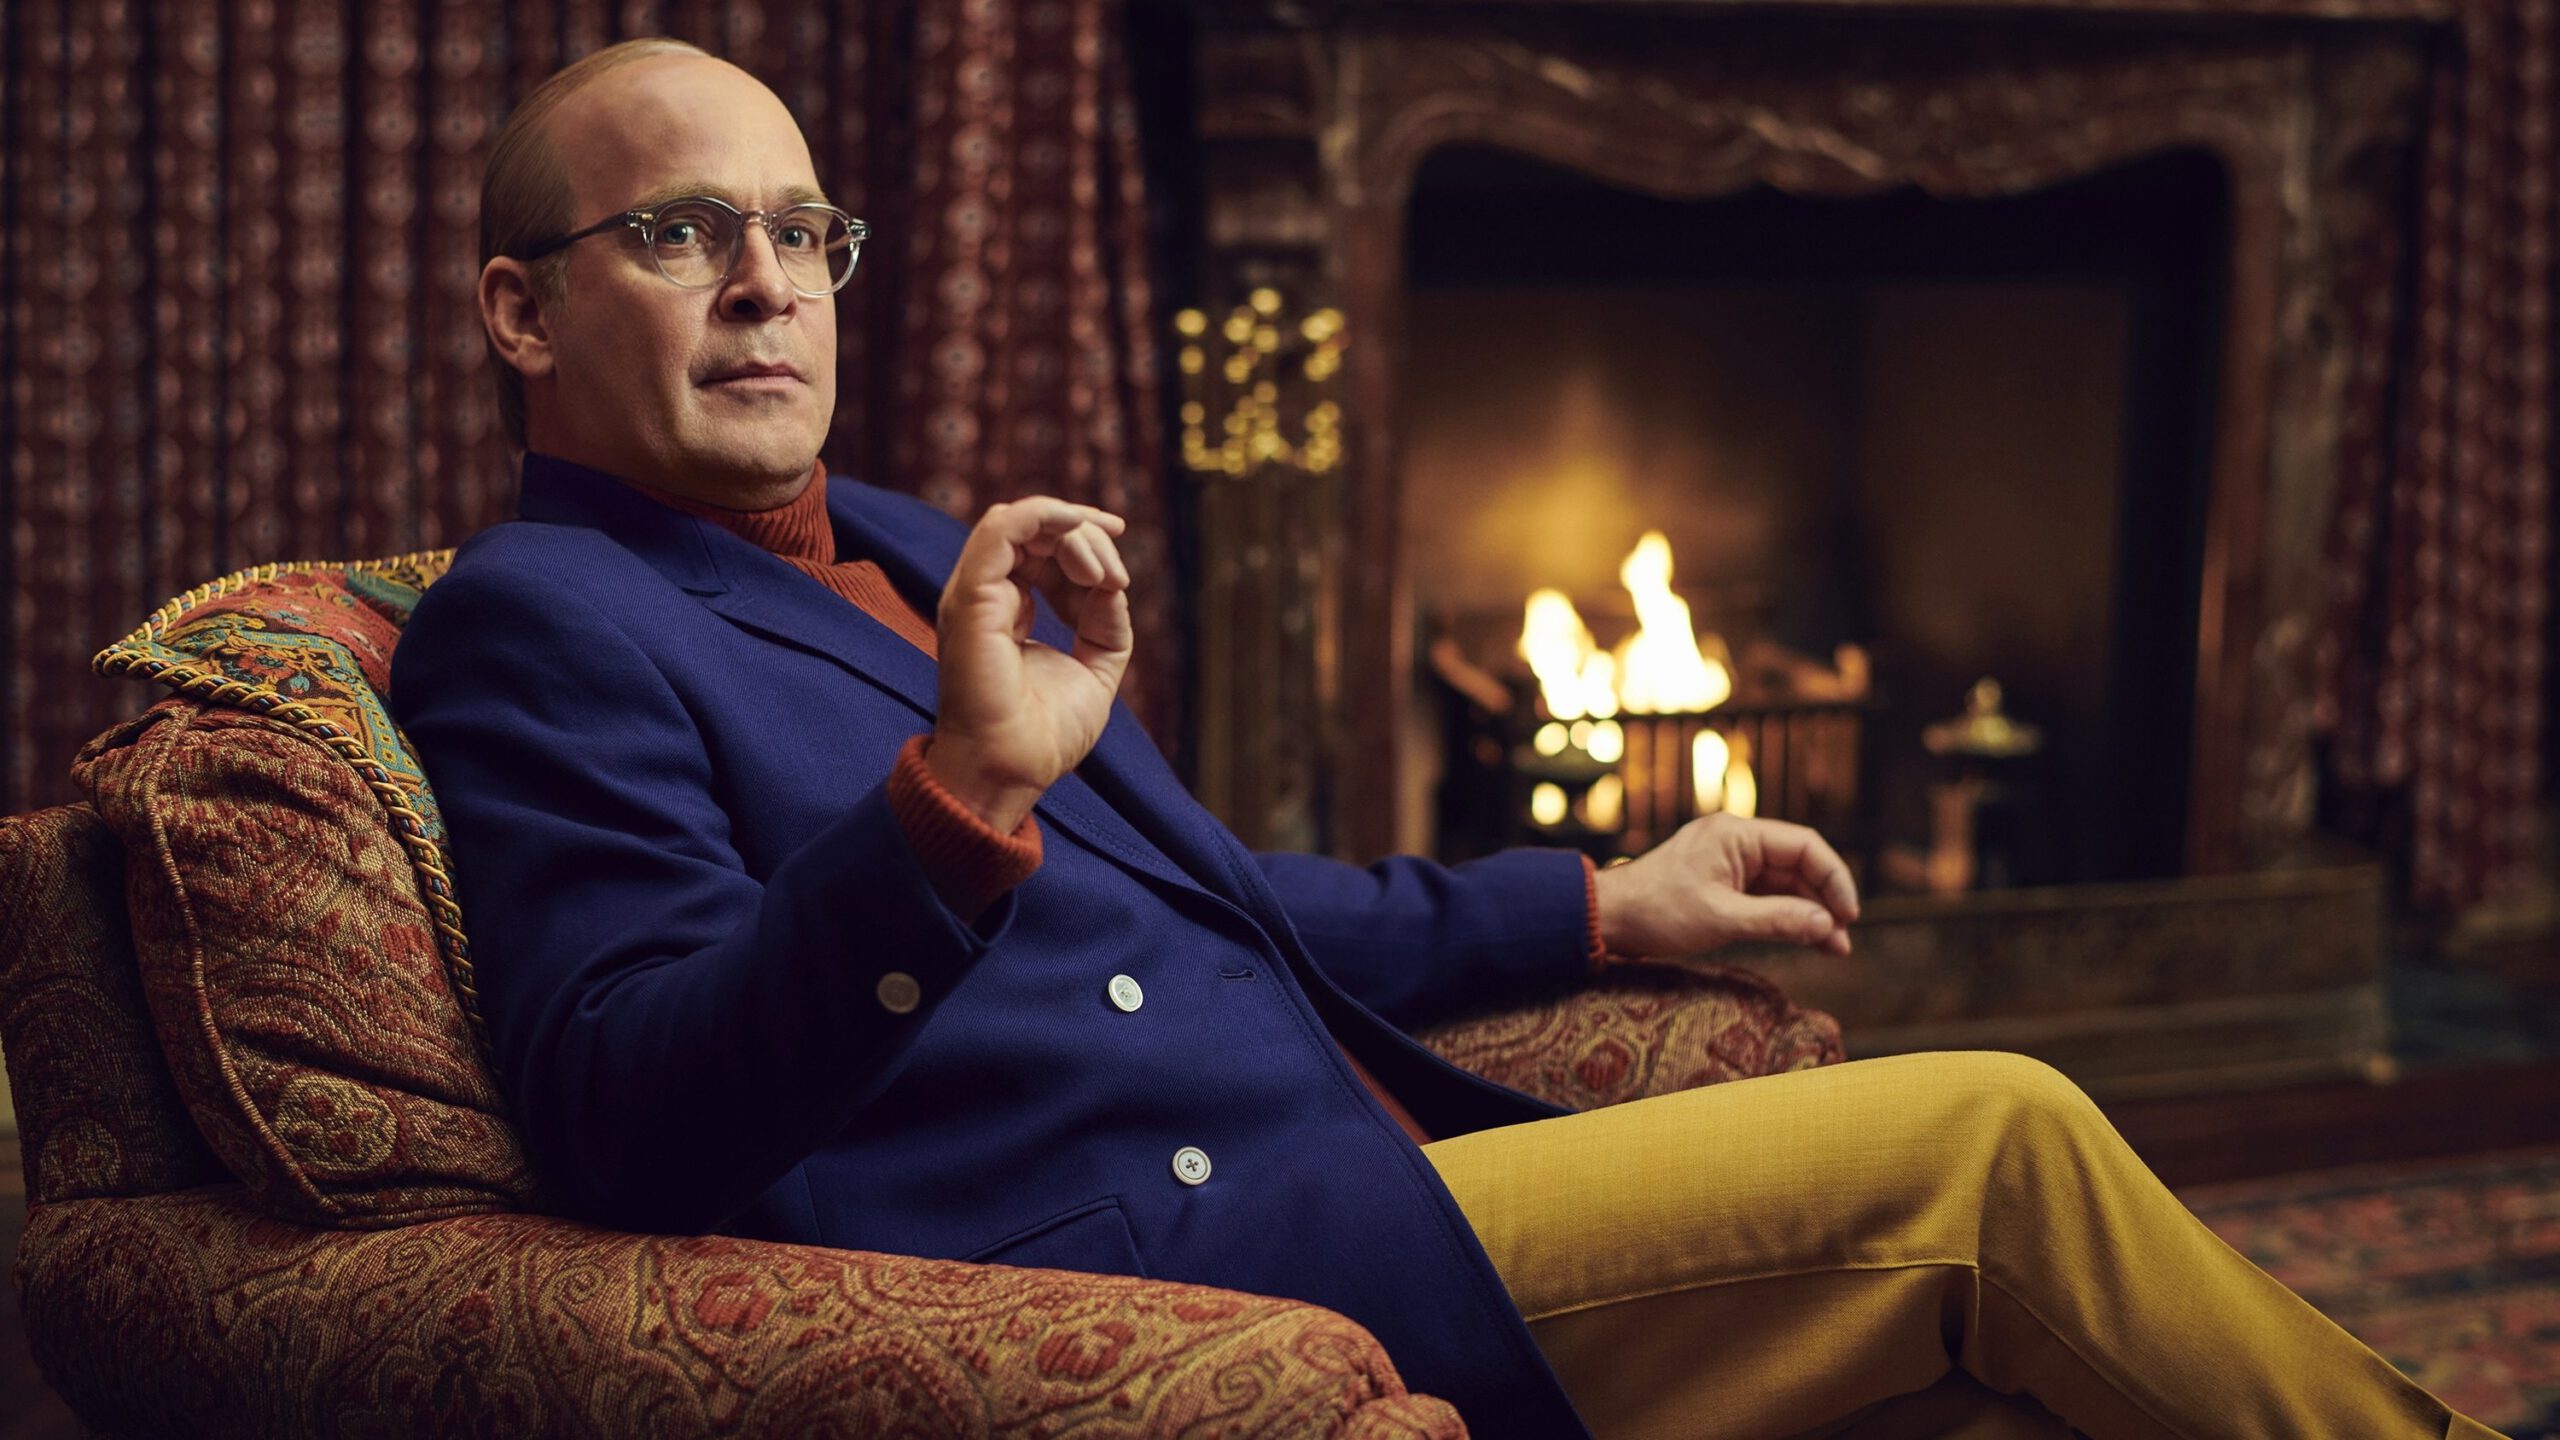 A man in a blue suit jacket, red turtleneck, and yellow pants sits in an armchair by a fireplace.